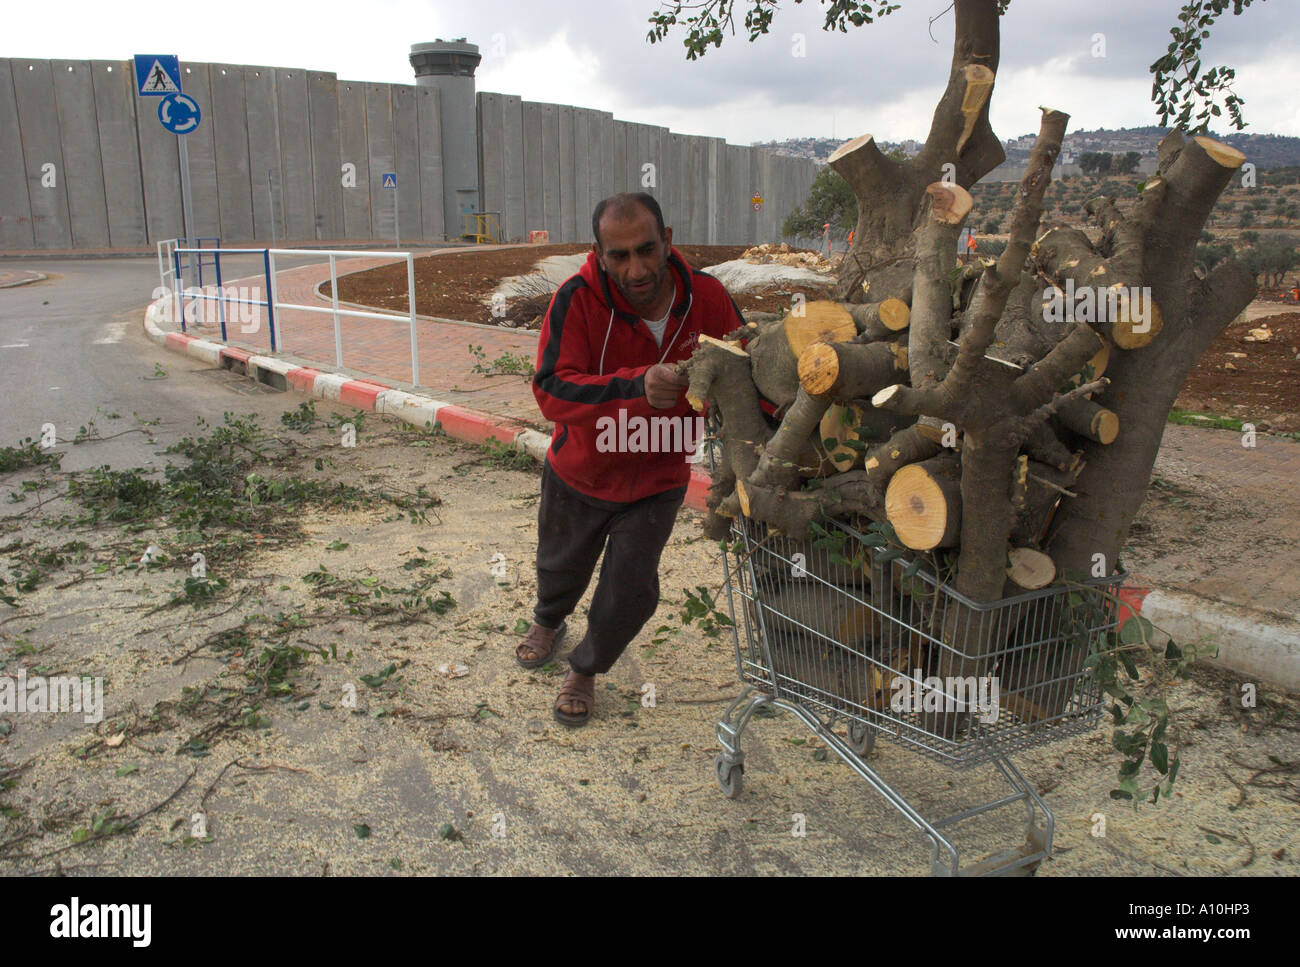 Isreal Jerusalem The Fence between Israel and the Palestinian Authority at the entrance to Bethlehem view with Palestinian man t Stock Photo